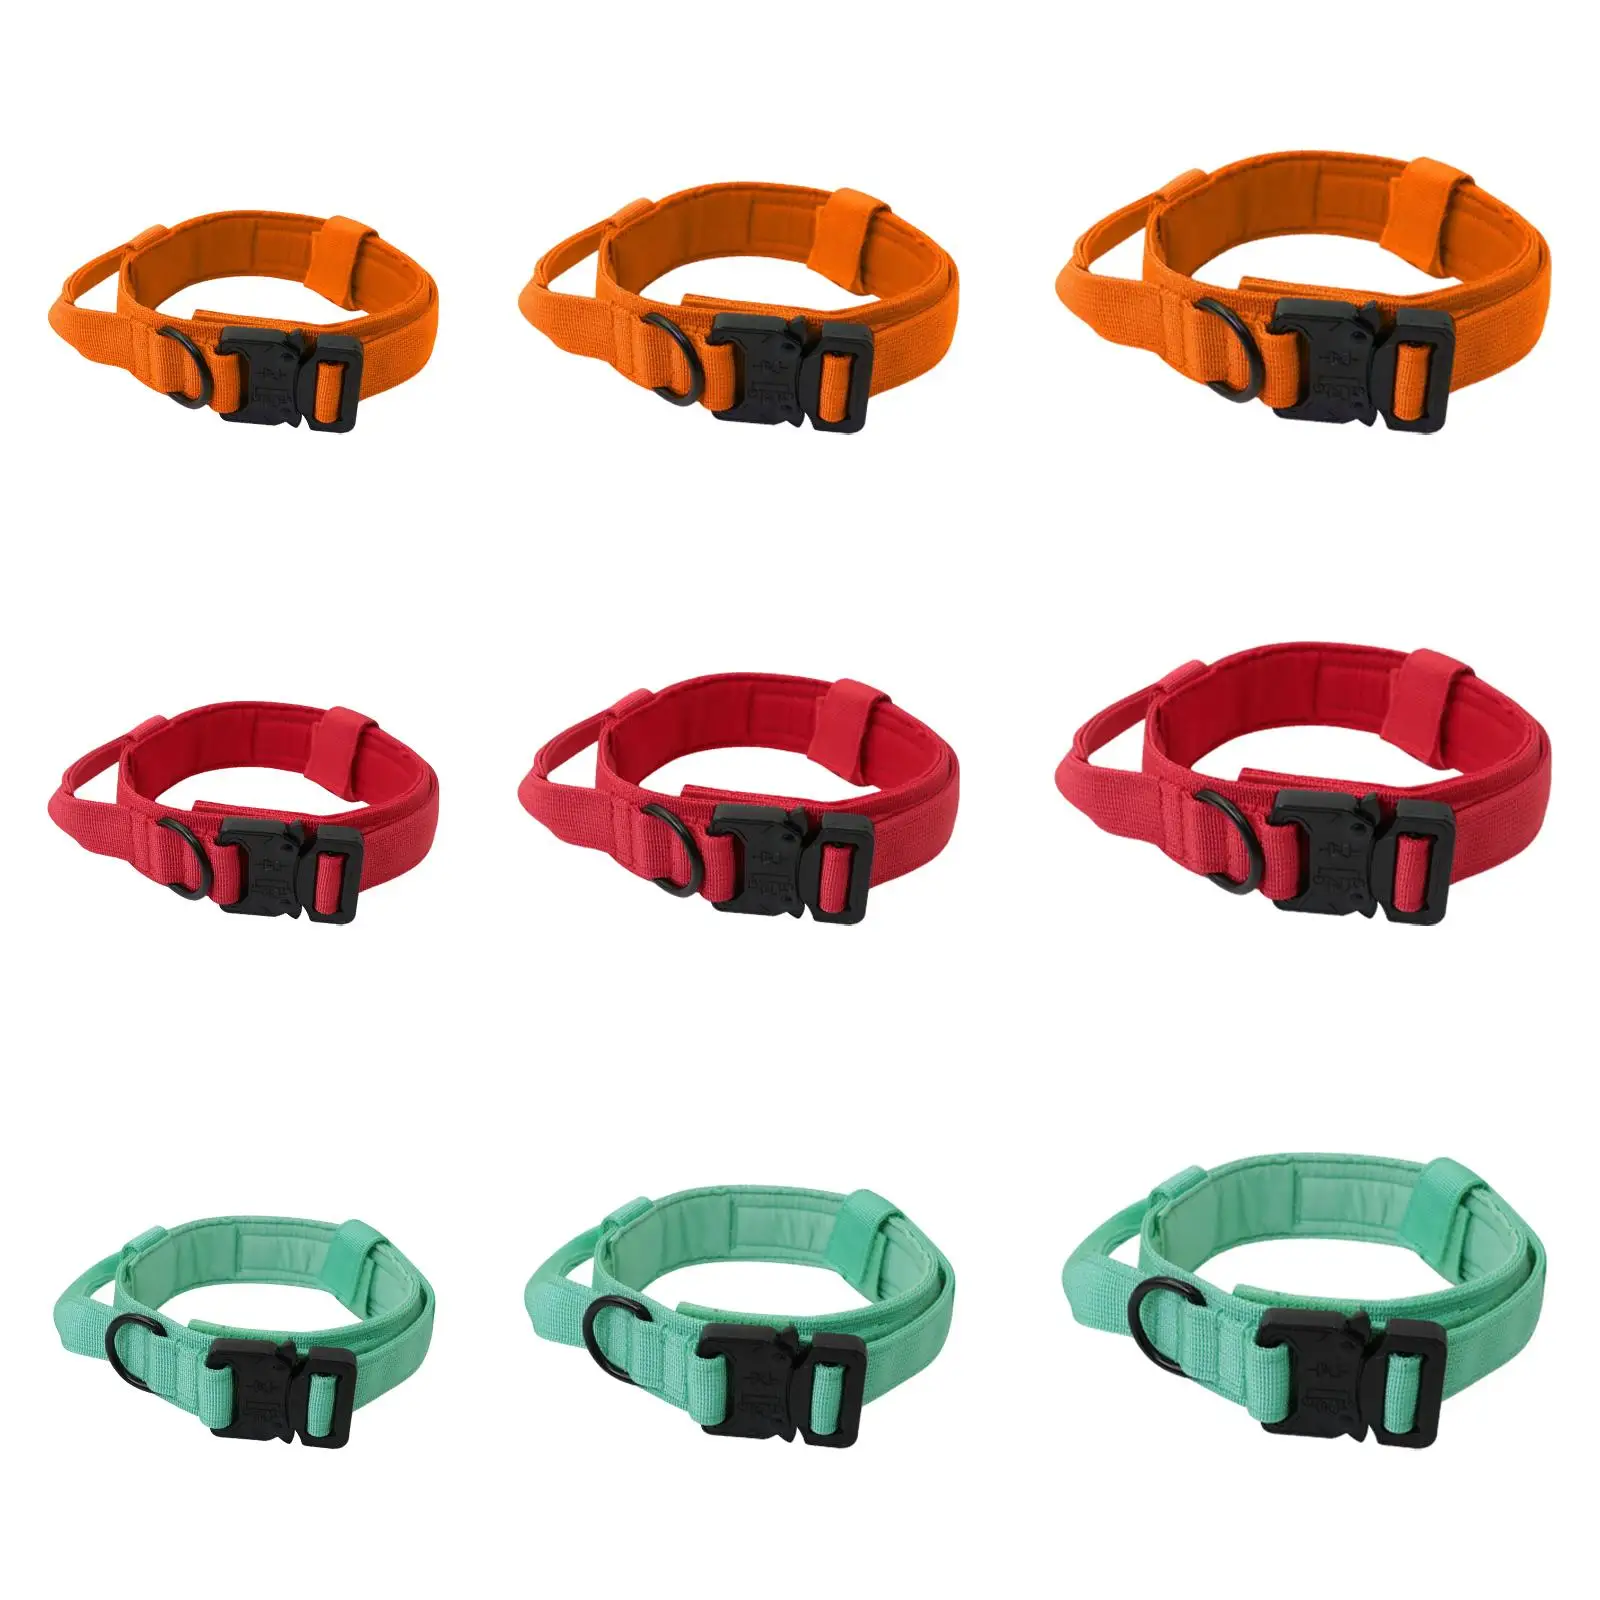 Durable  with Control Handle Safety Nylon Training Collar for Small Medium Large Dogs  Accessories Canine Coaching Travelling